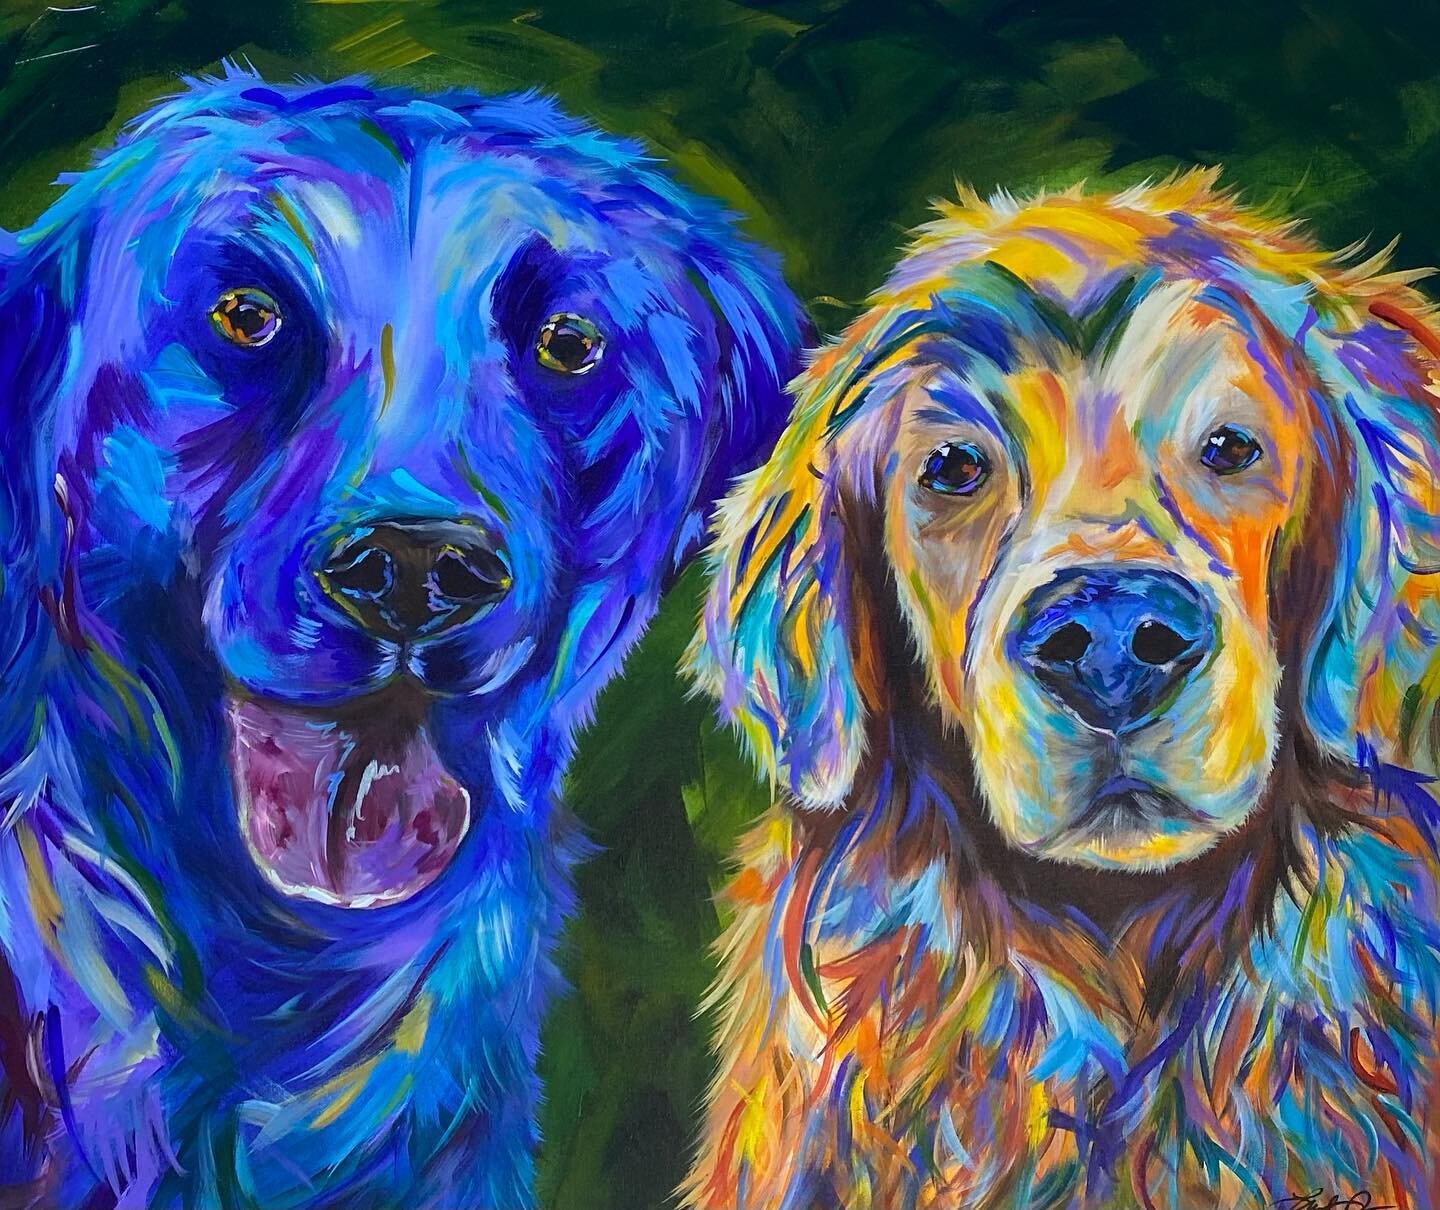 &ldquo;Rescued By Love&rdquo;. Fabulous name ! Thank you to these guy&rsquo;s DogMom for choosing me to paint your four legged family! #dogs #dogpainting #rescuedogsrule #rescuedog